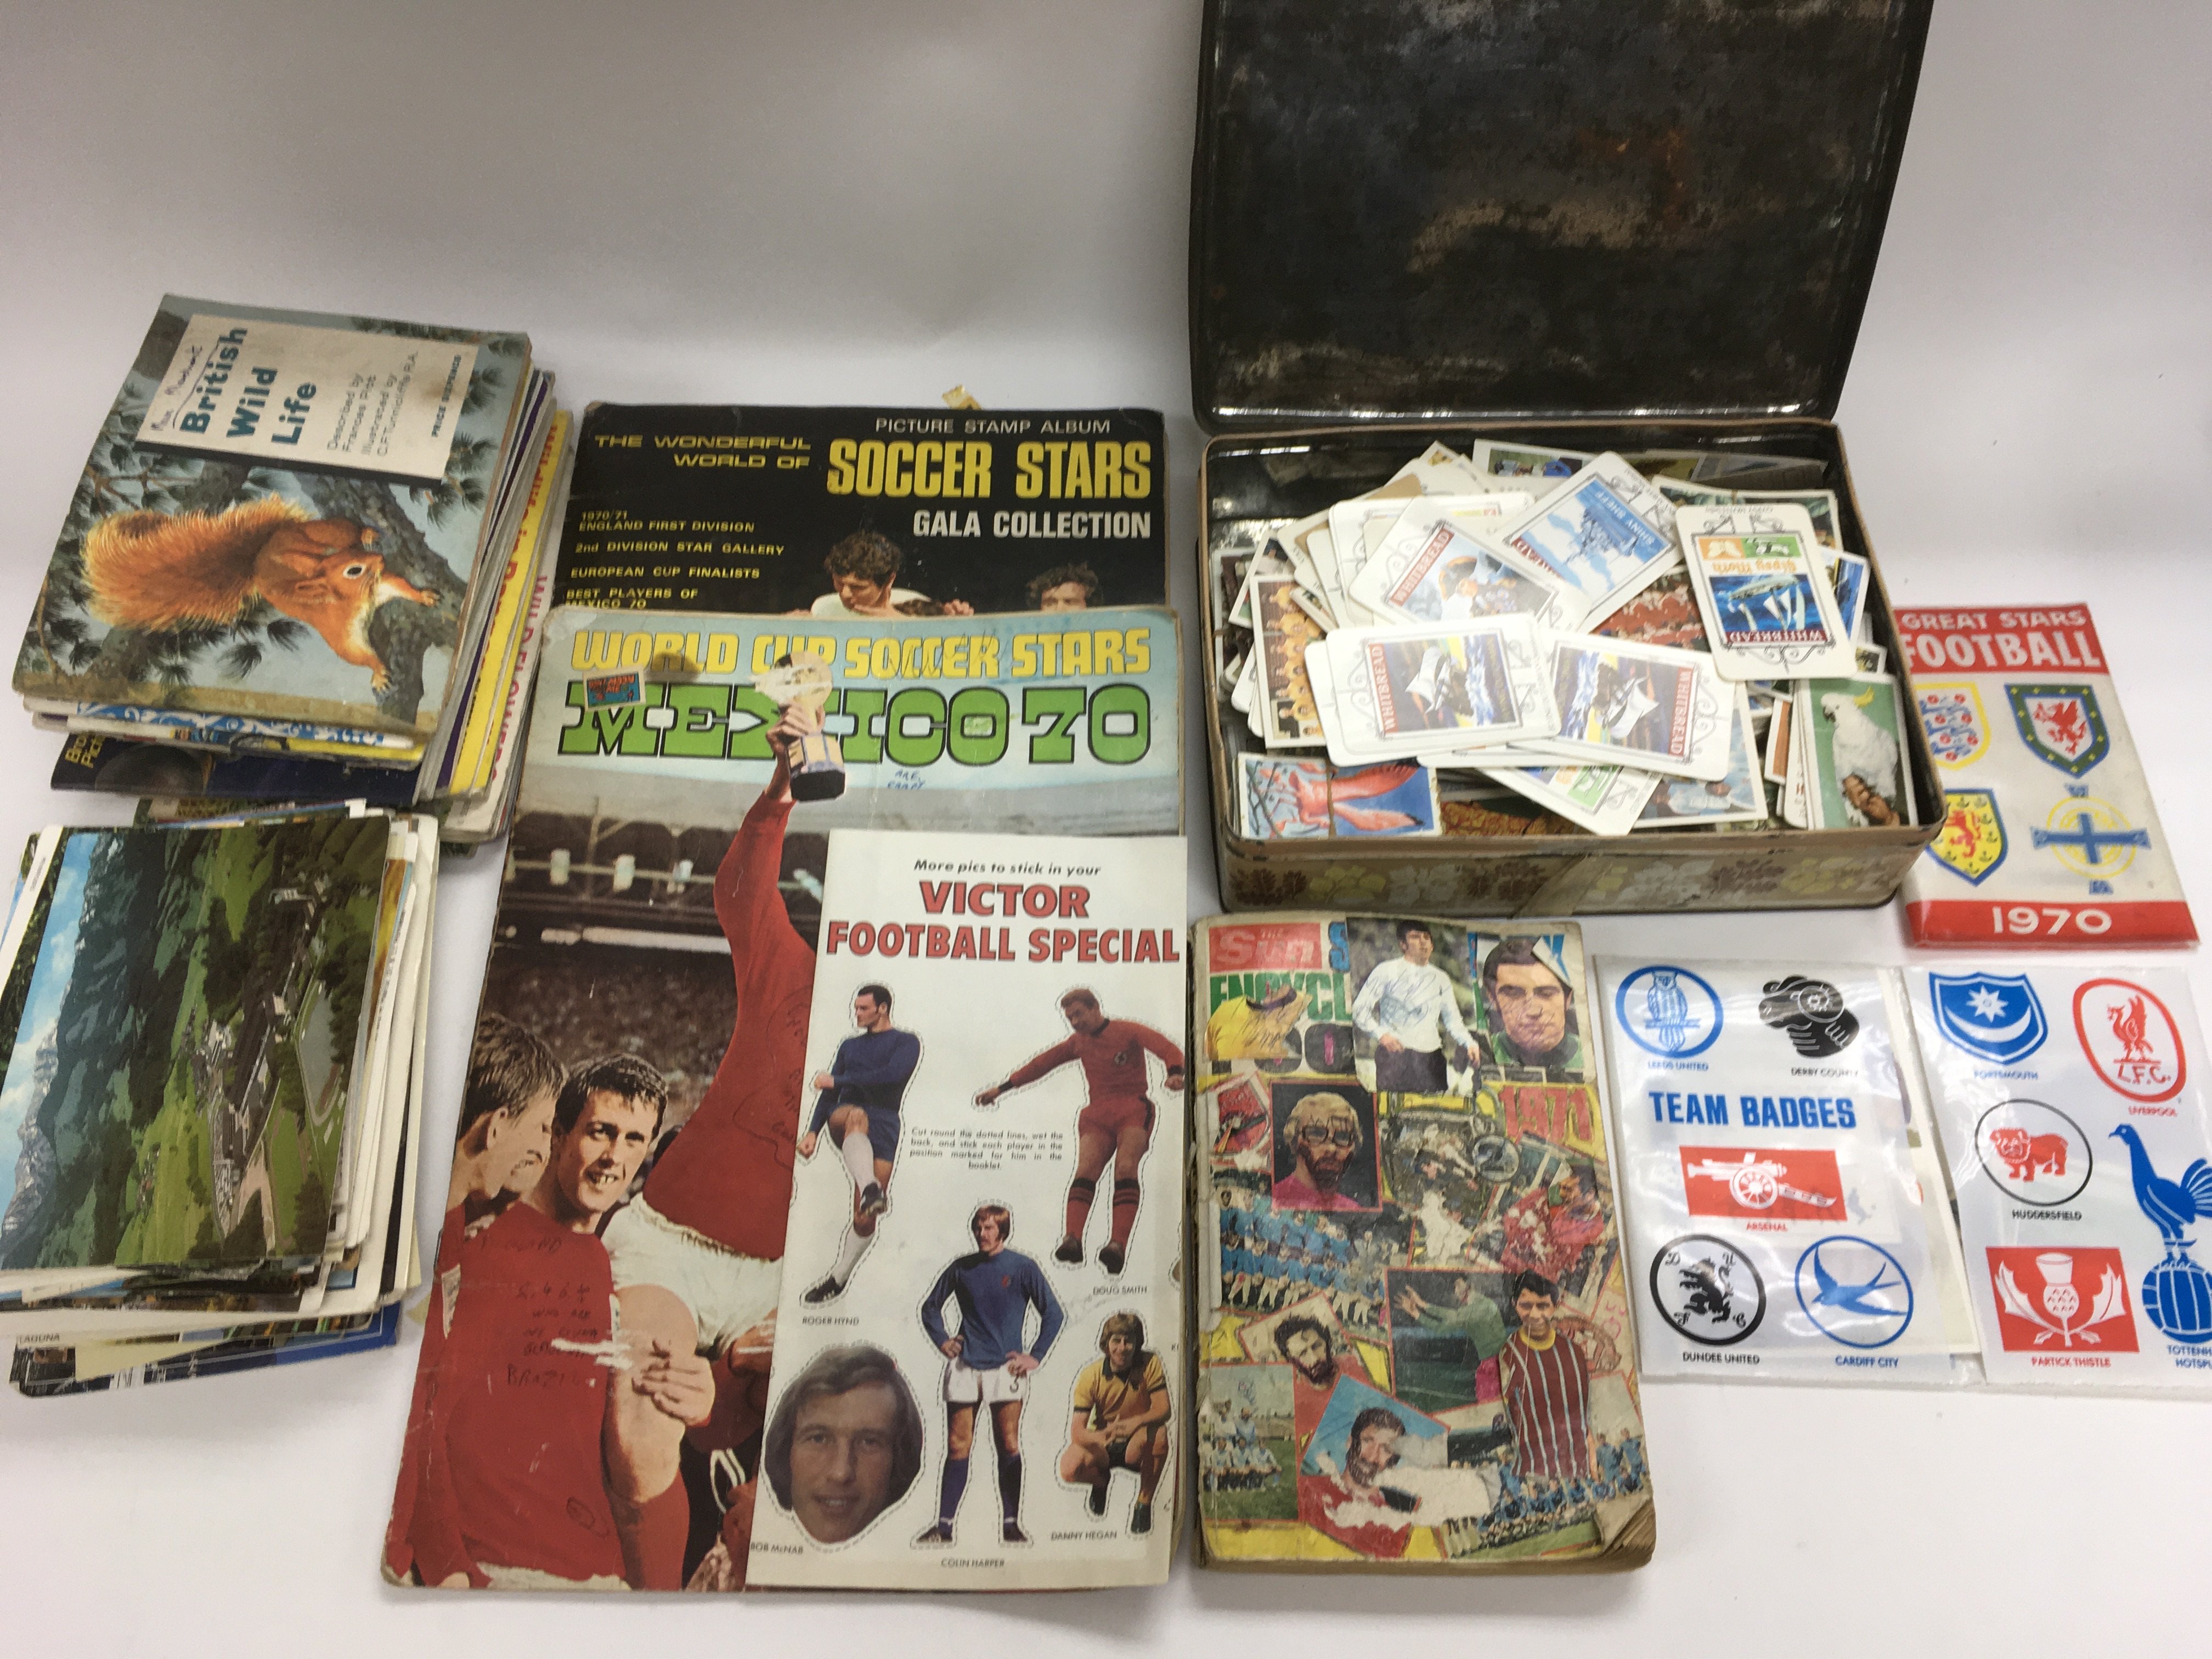 A collection of trading cards, tea cards and postc